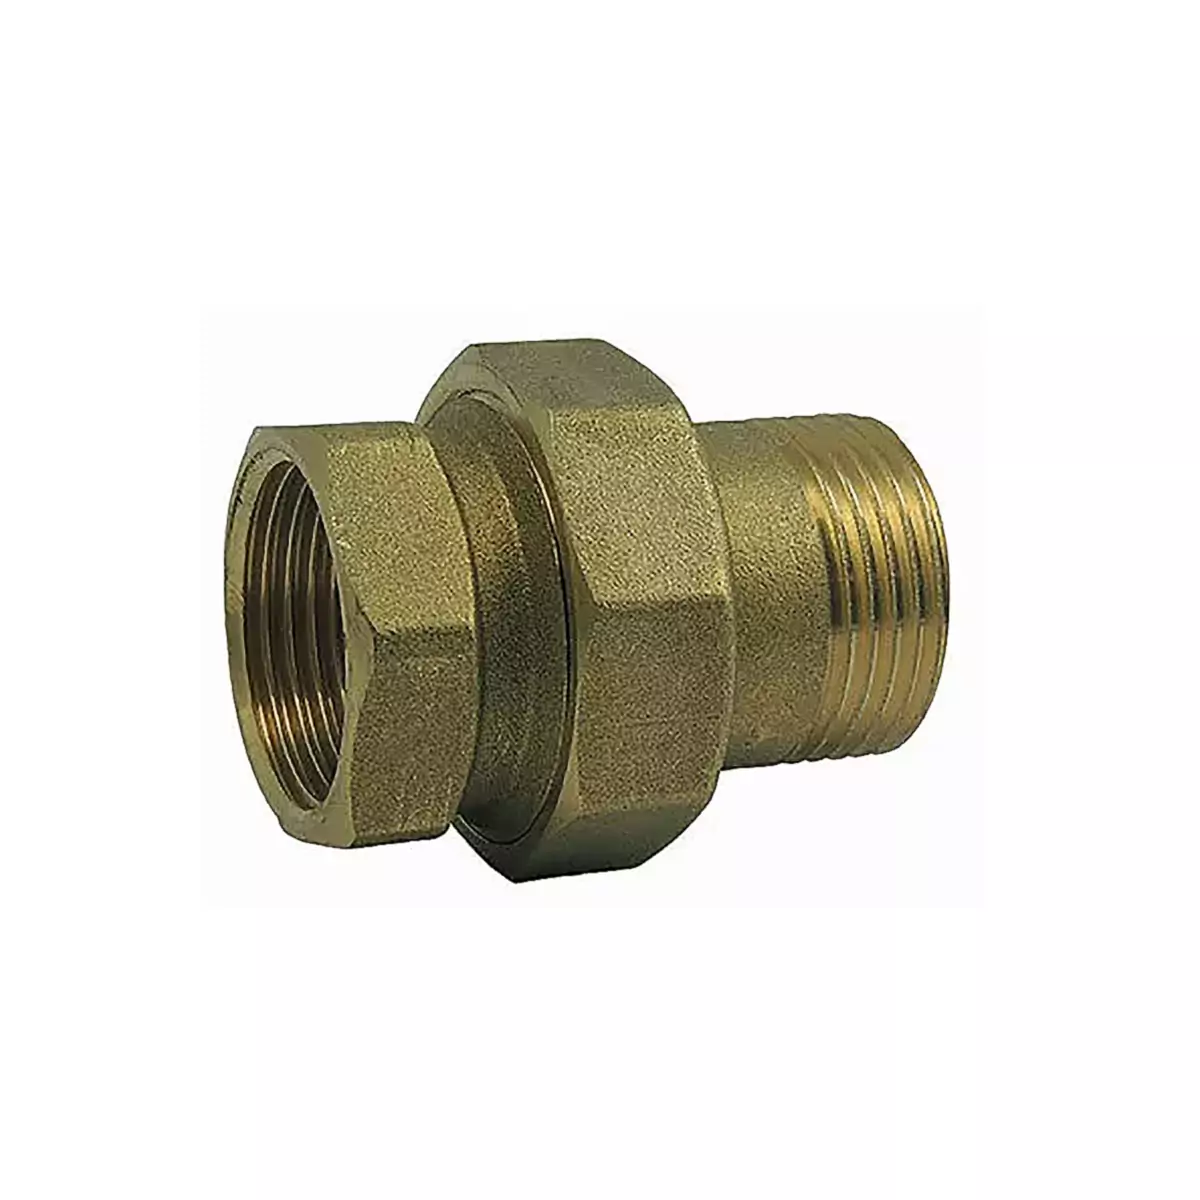 Straight brass union connection for M/F radiator